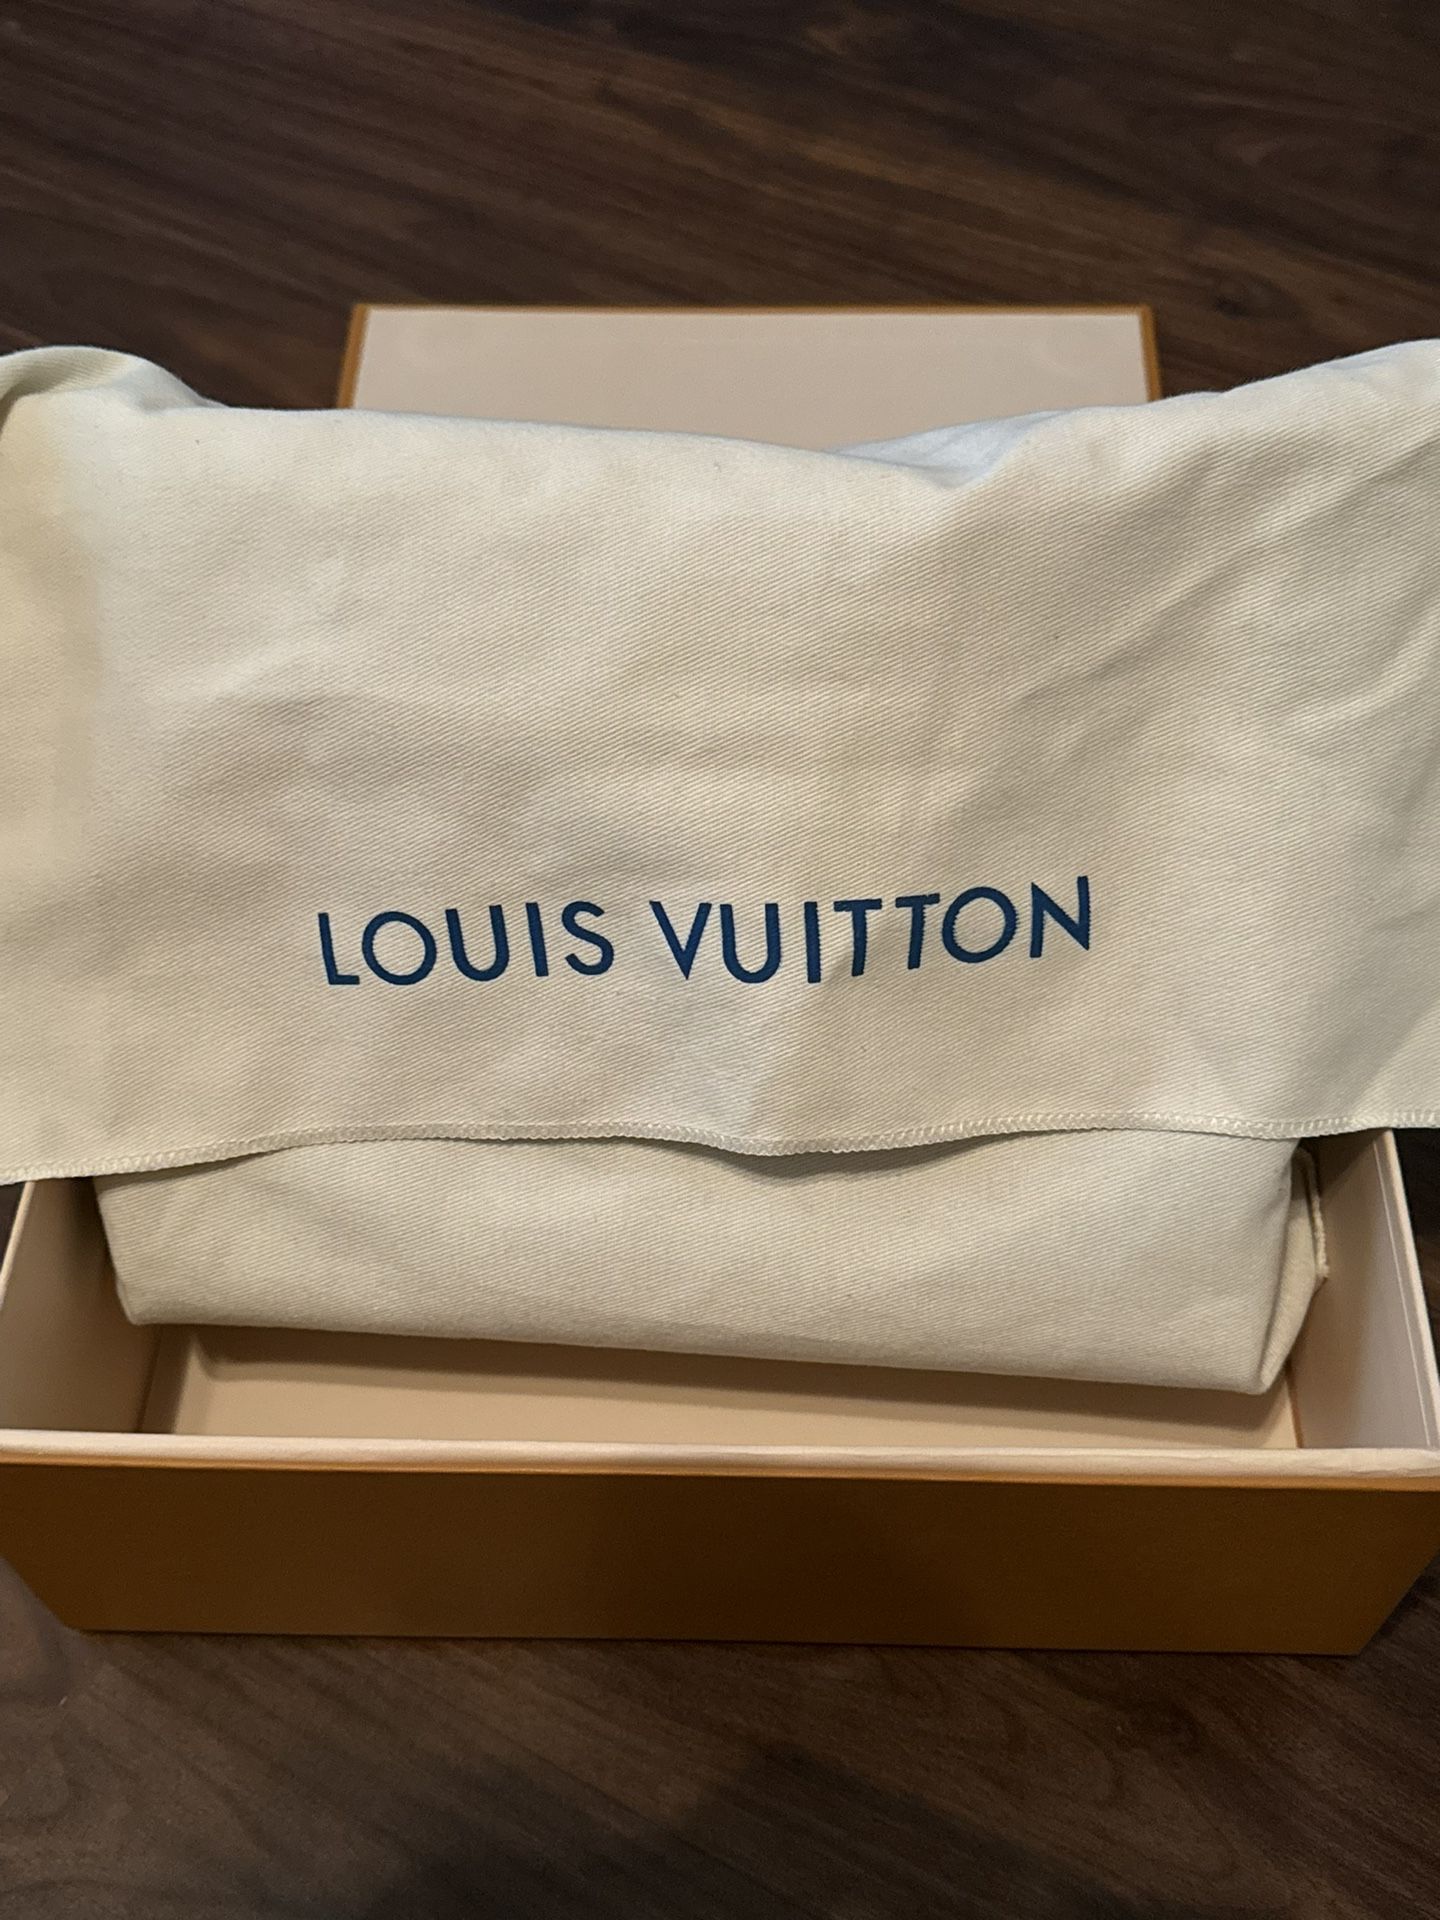 New Louis Vuitton OnTheGo Bag for Sale in Chesapeake, VA - OfferUp